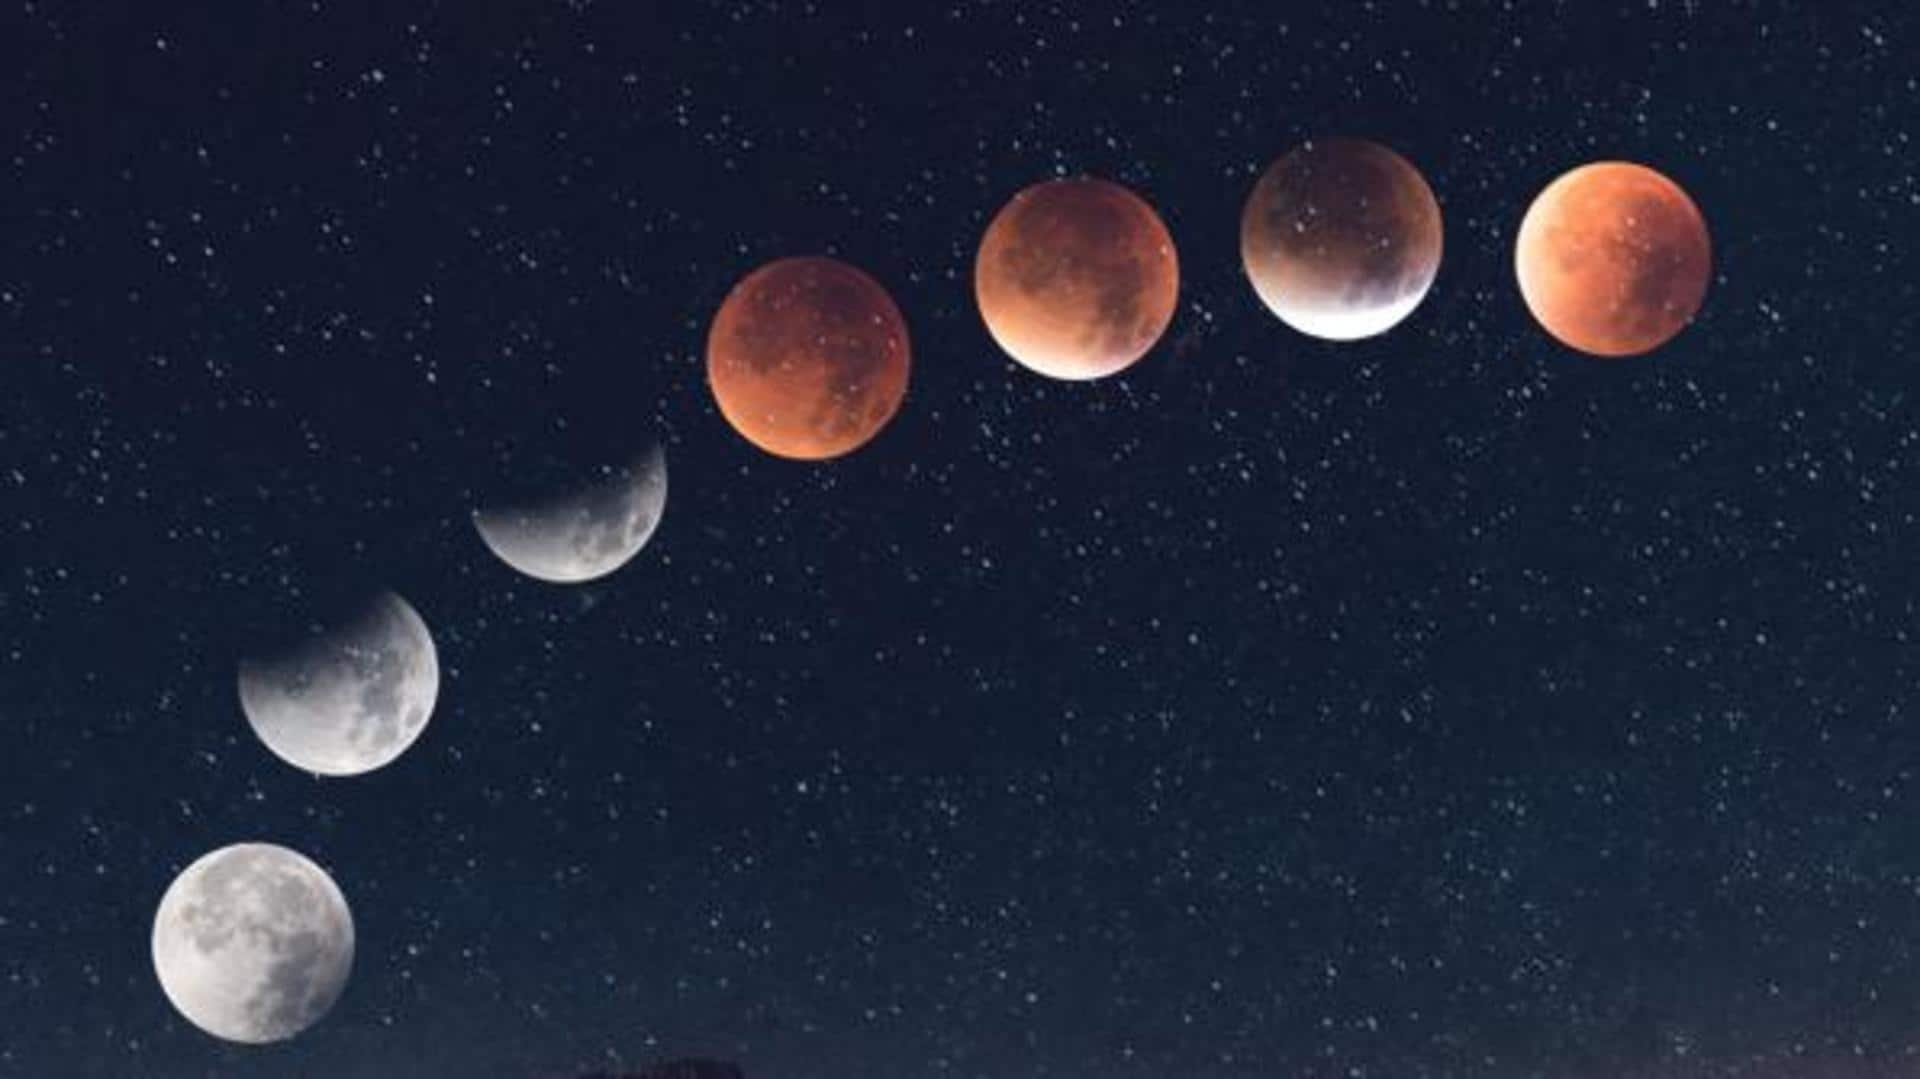 First lunar eclipse of 2023: When and how to watch